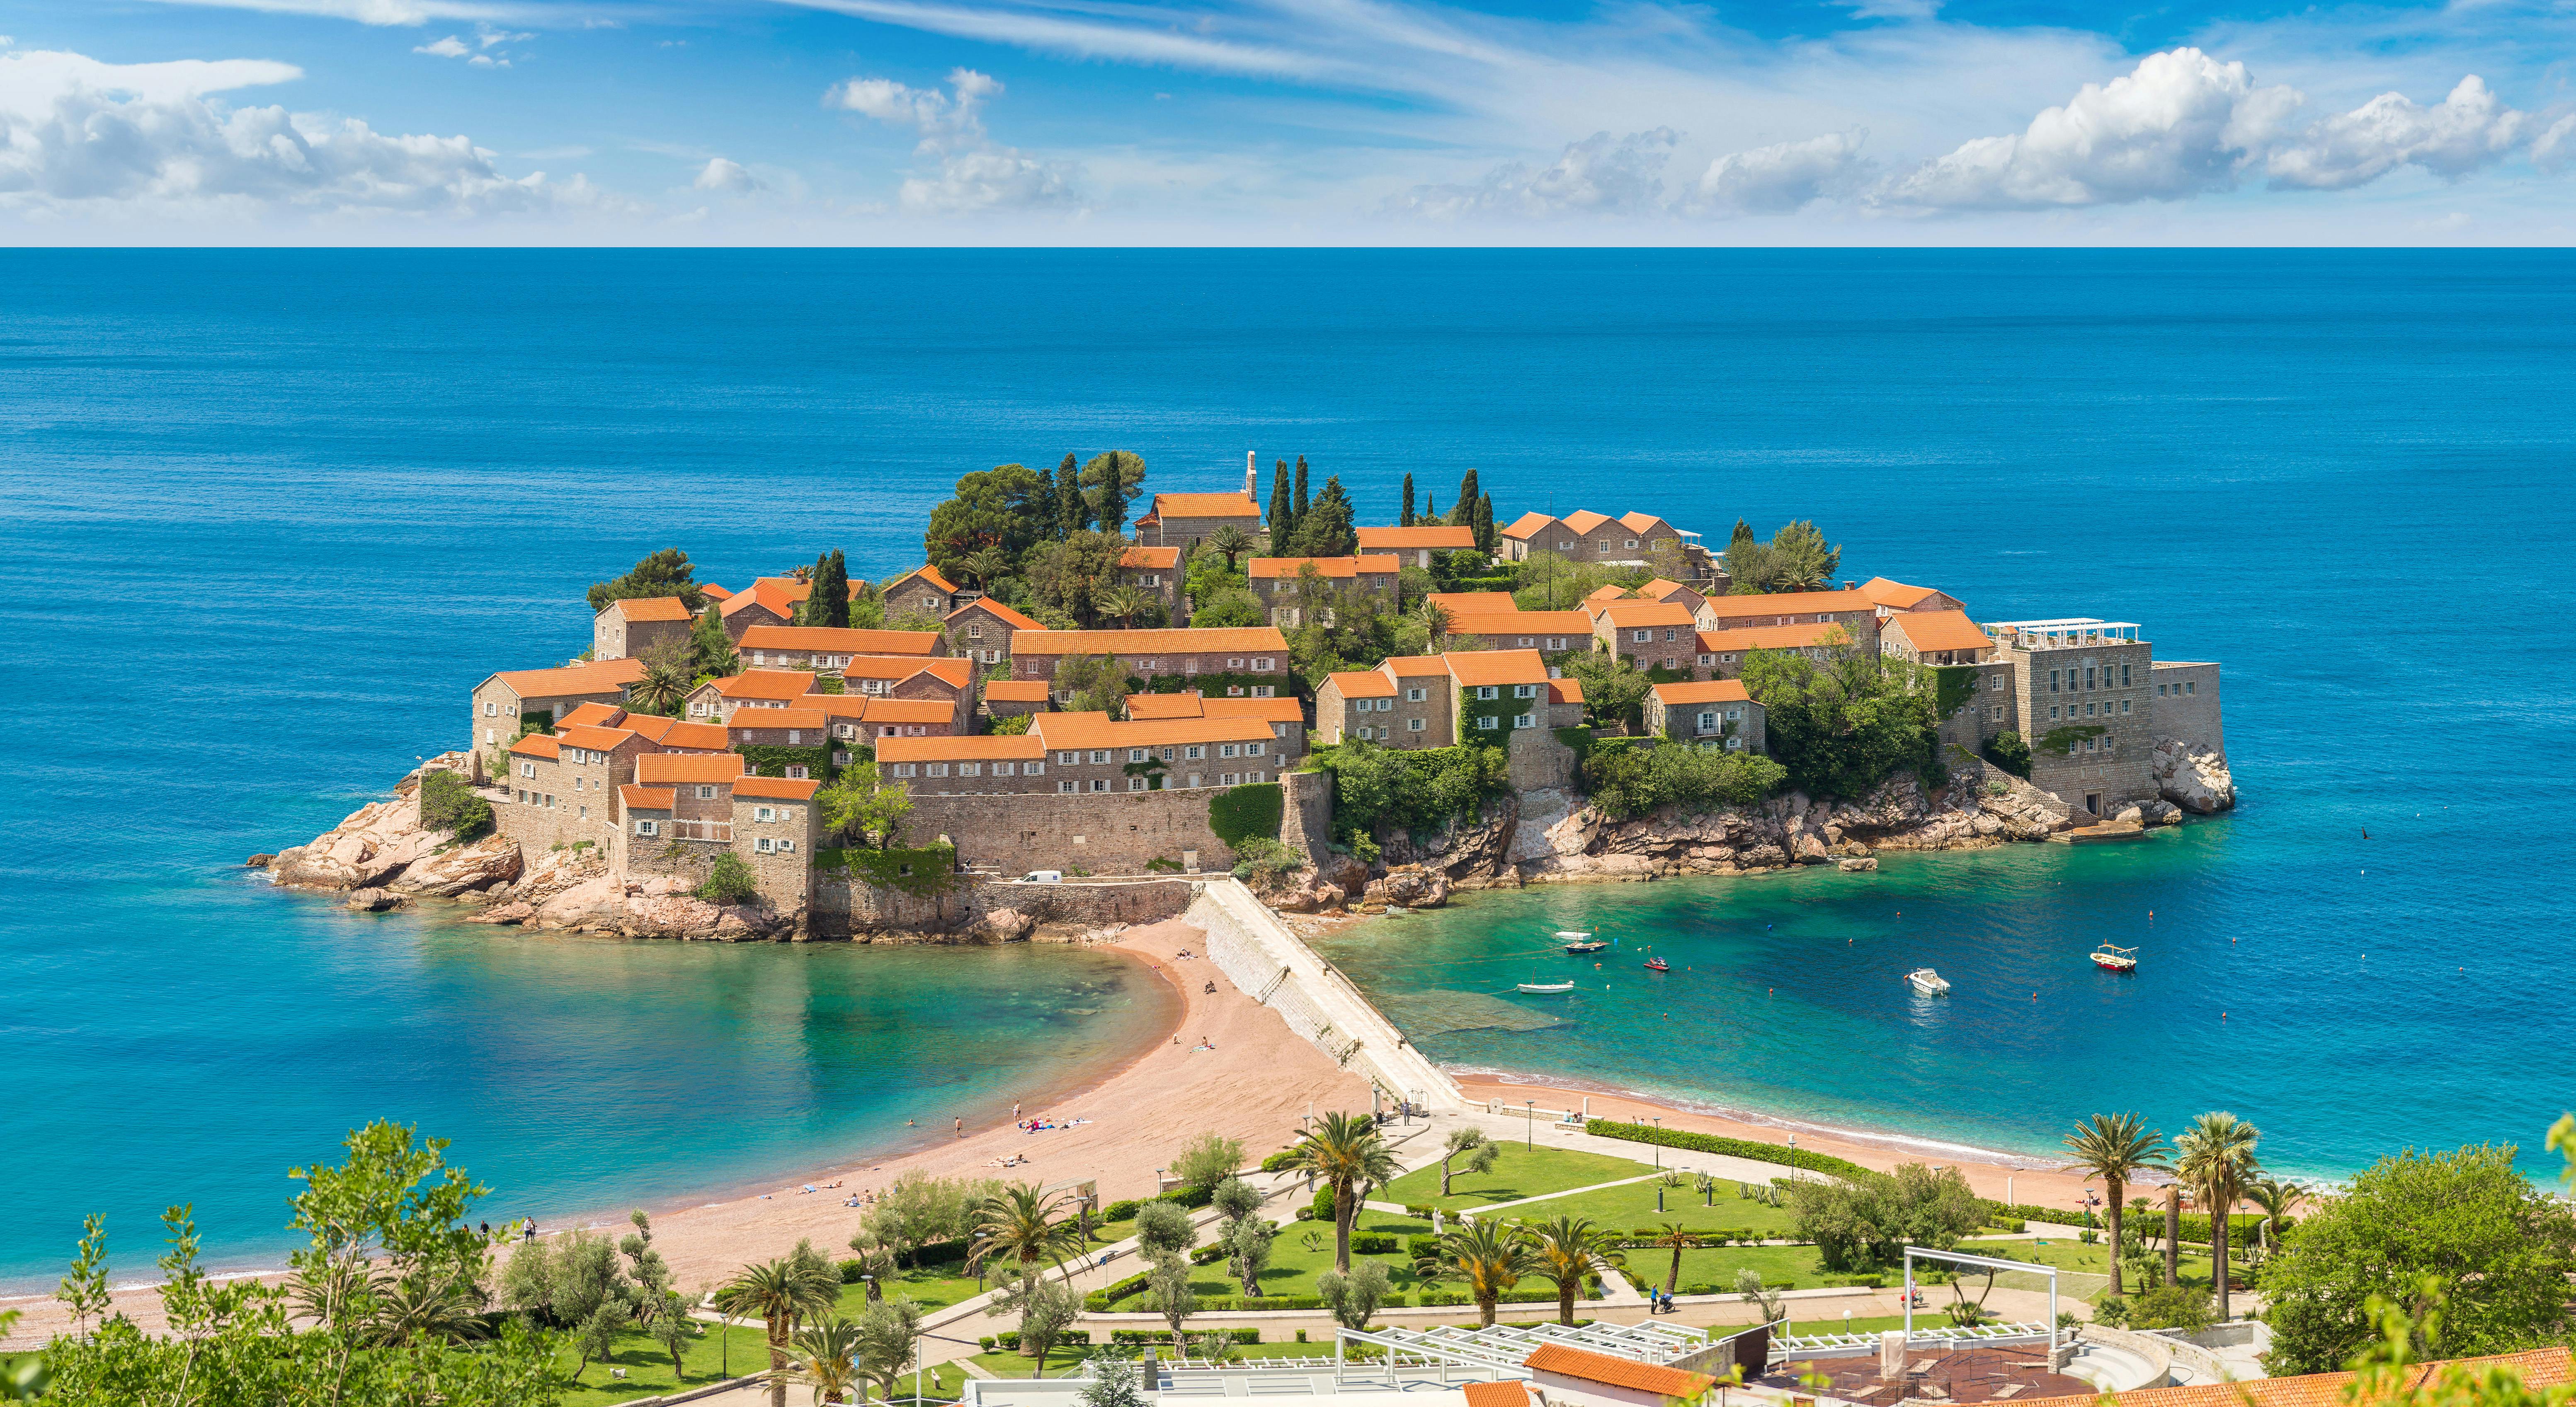 Full day tour to Kotor and Budva from Dubrovnik